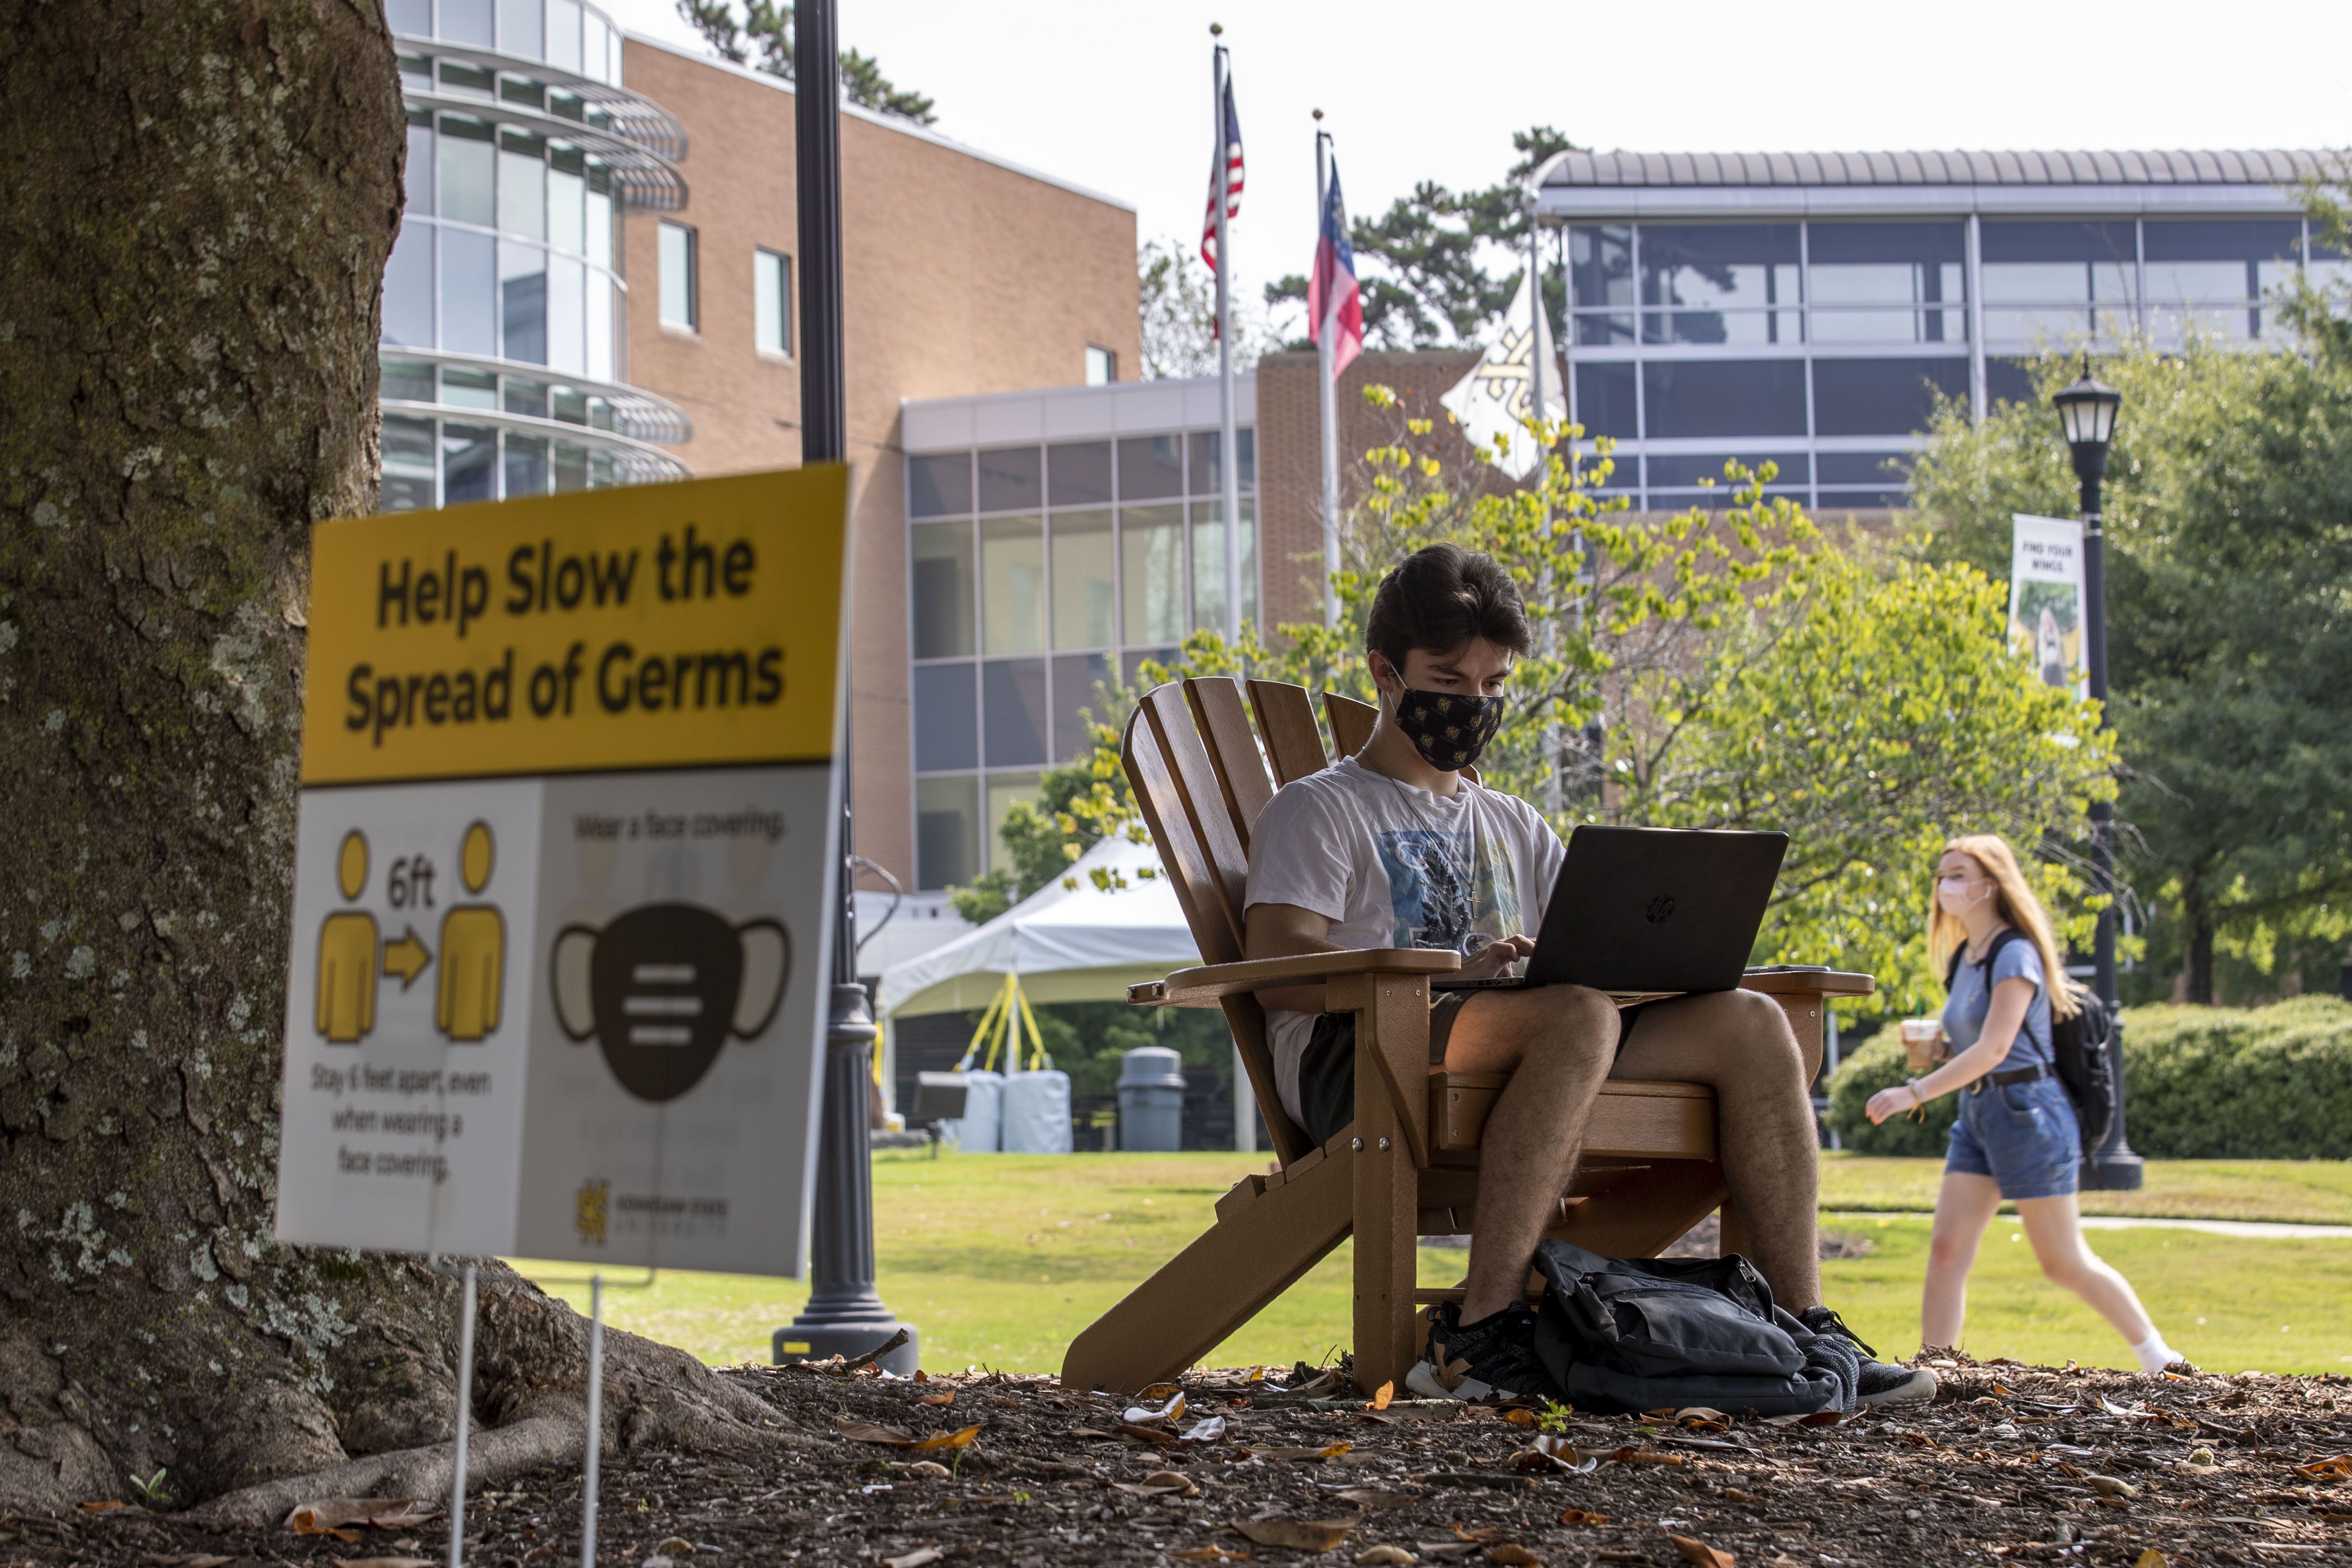 Kennesaw State University Summer Programs For High School Students